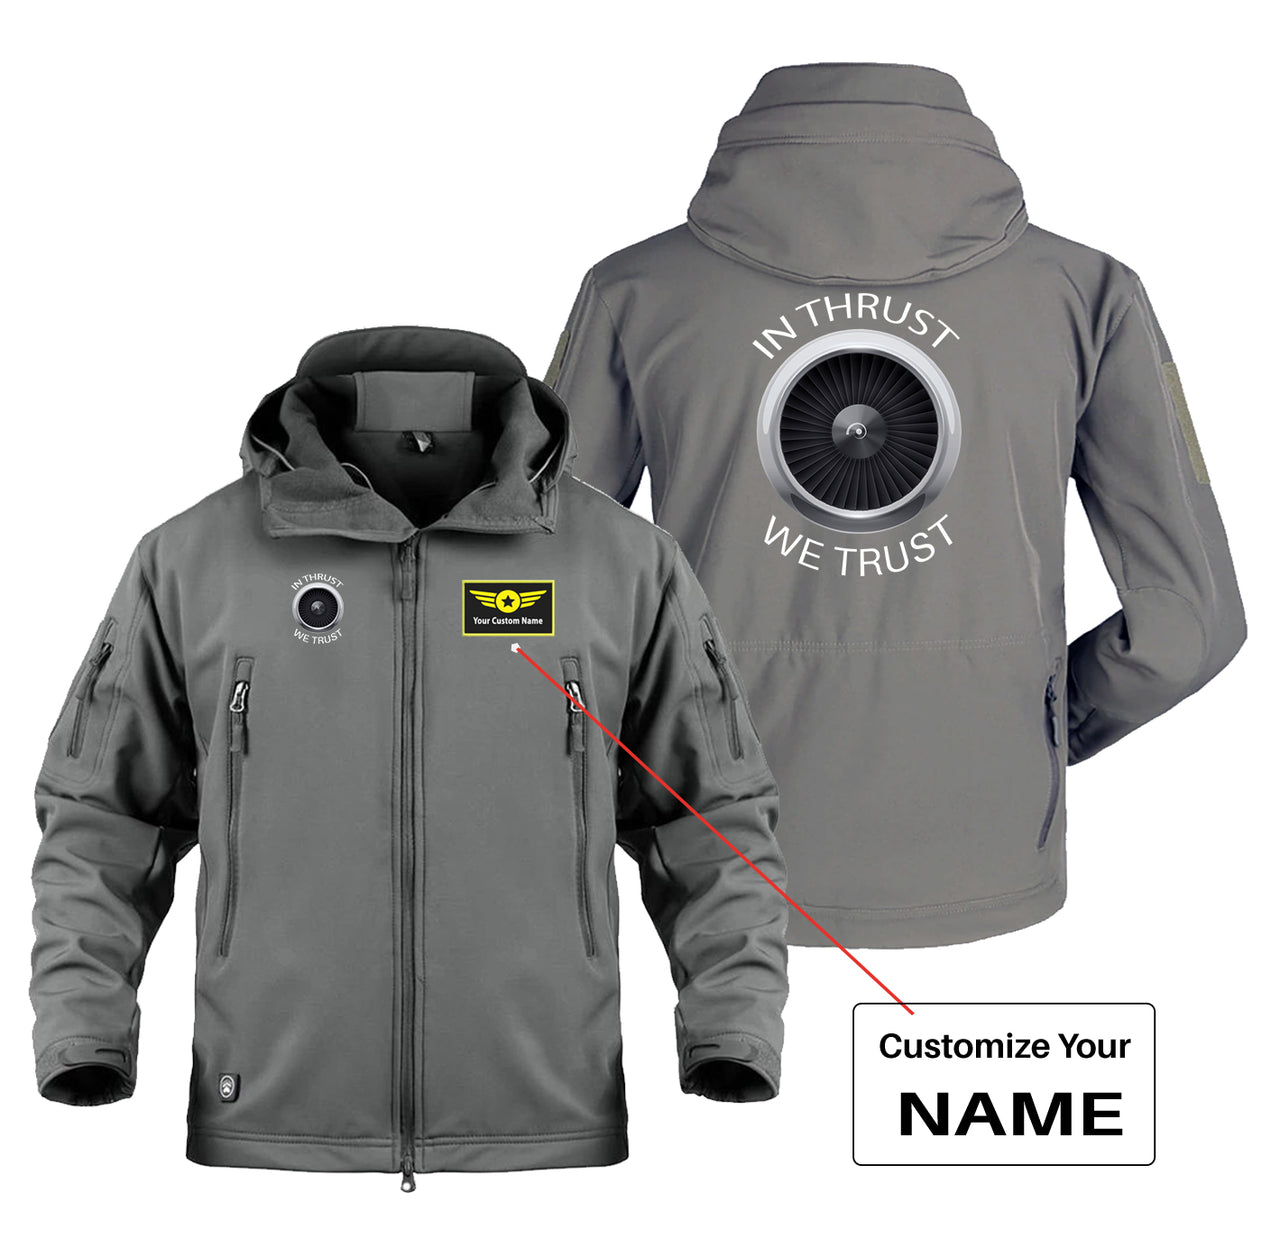 In Thrust We Trust Designed Military Jackets (Customizable)